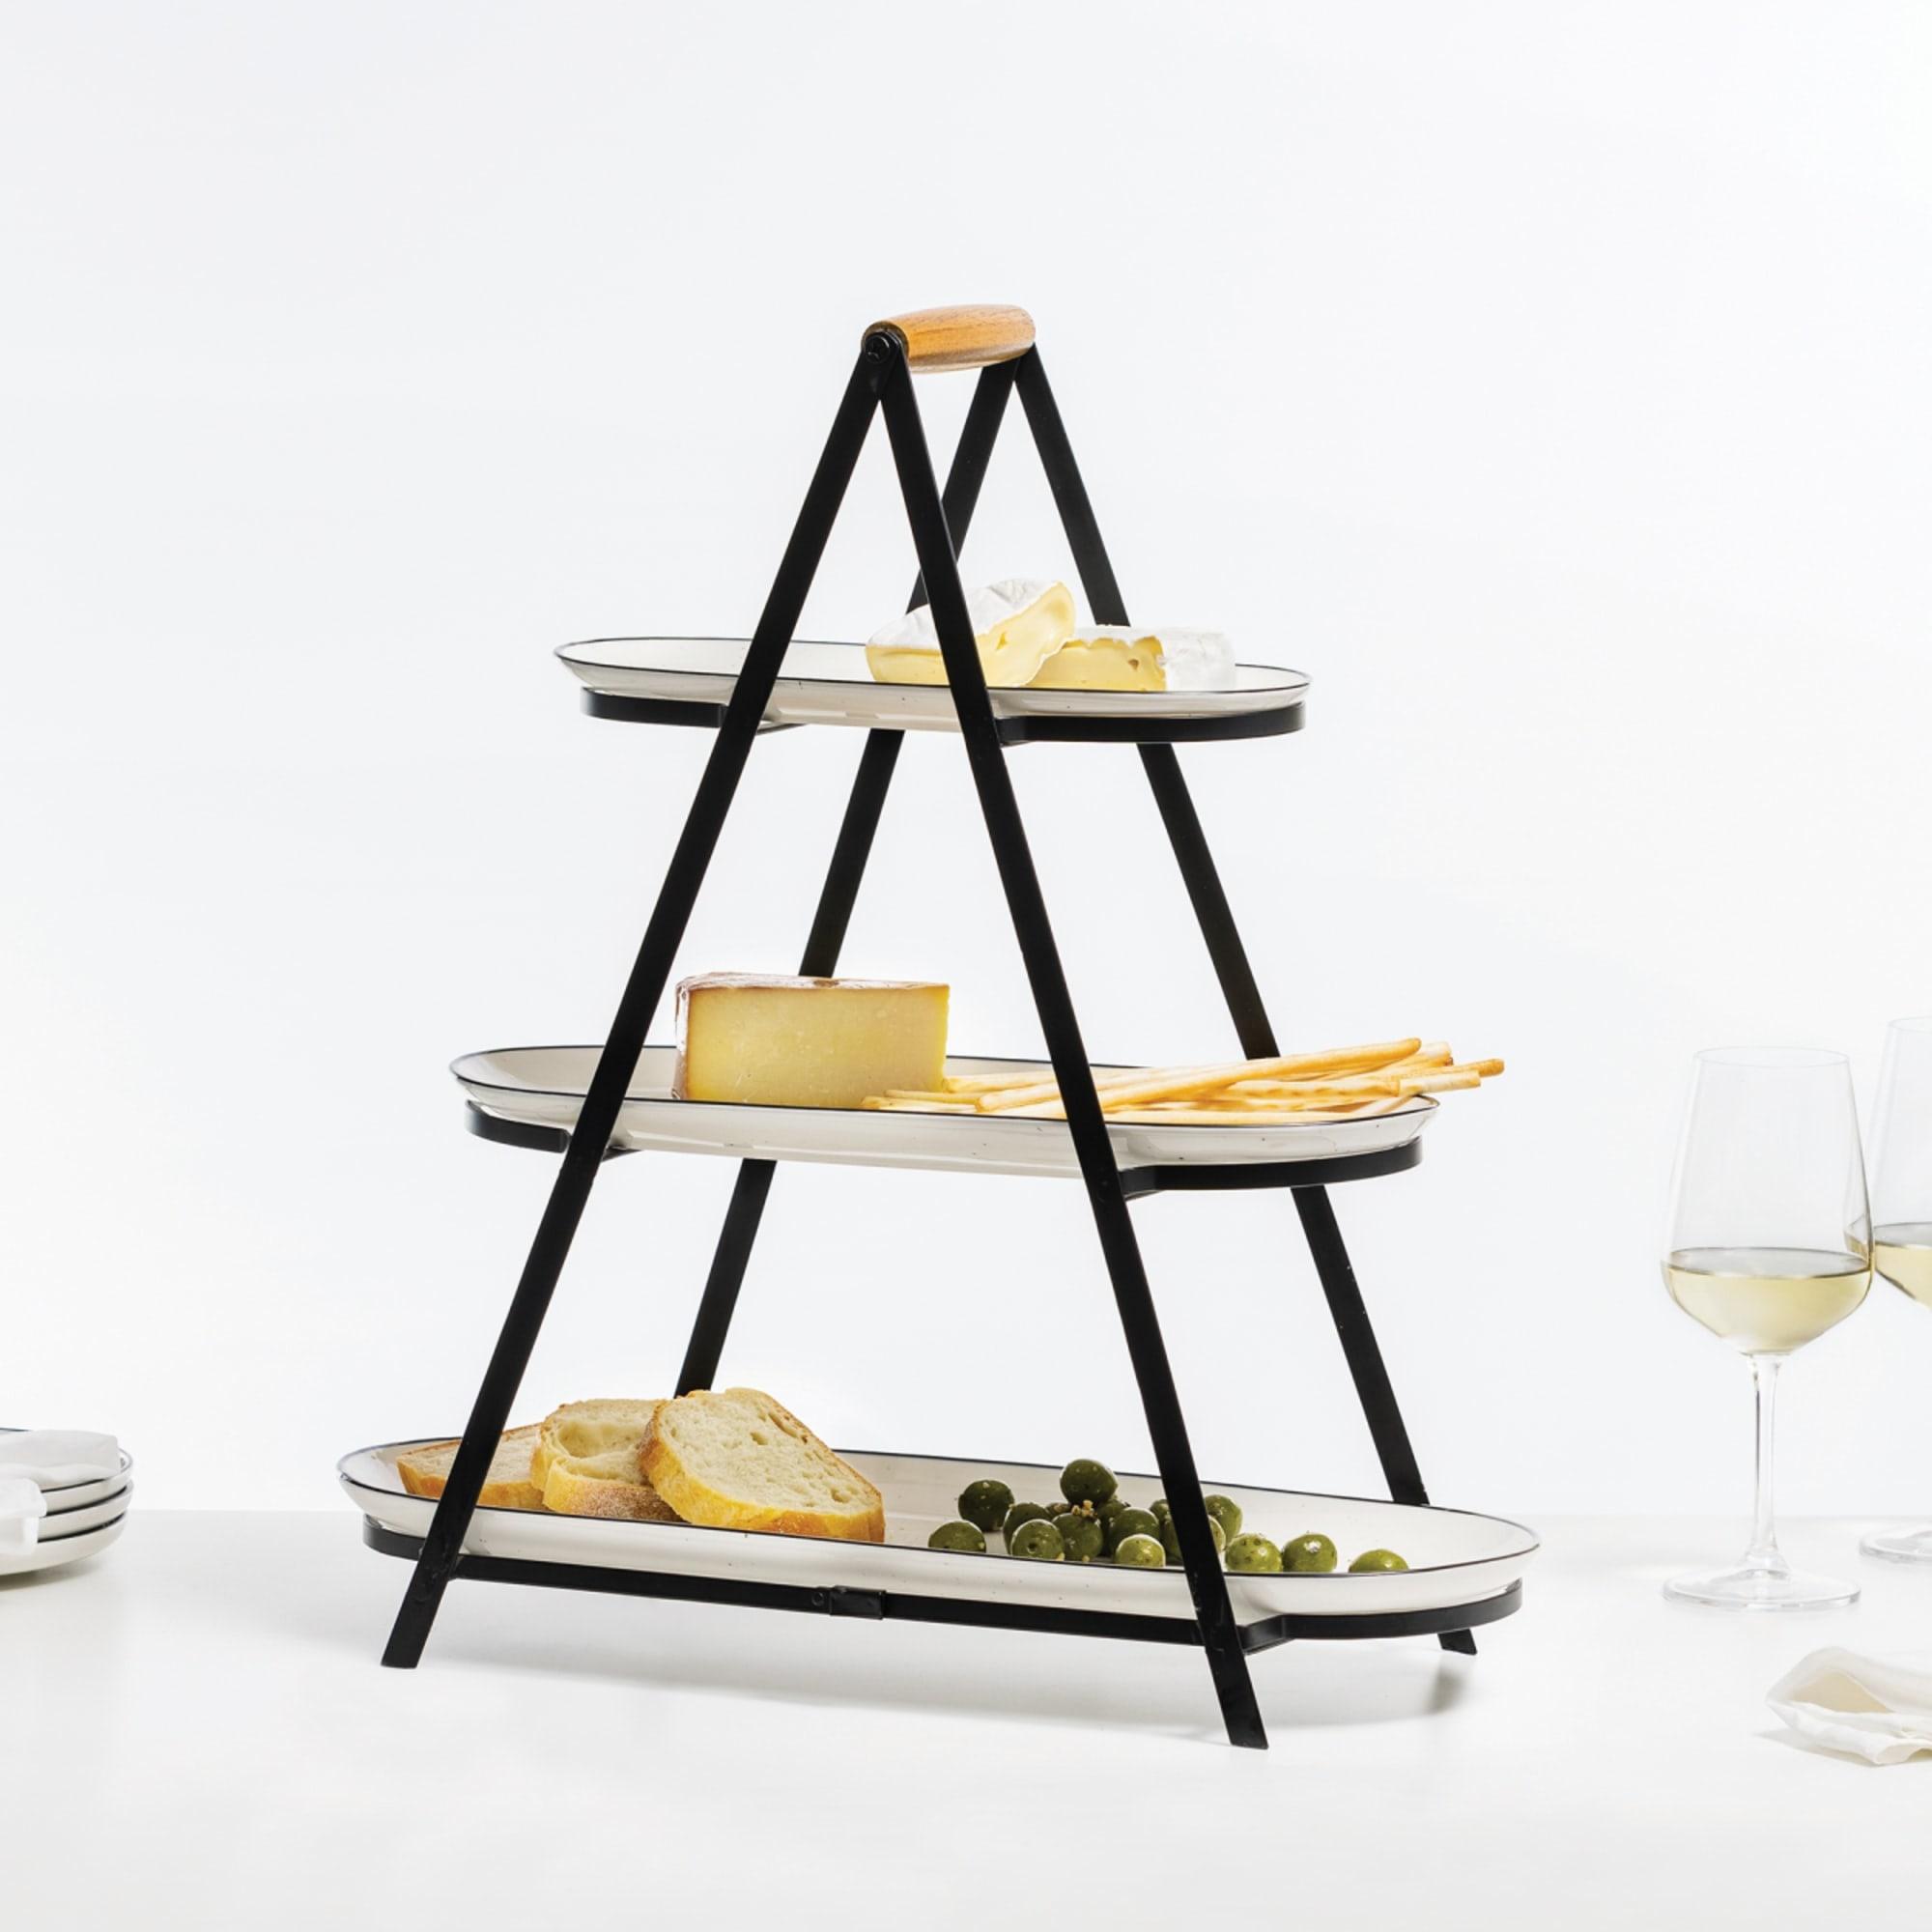 Salisbury & Co Mona 3 Tier Serving Tower White with Black Speckle Image 5